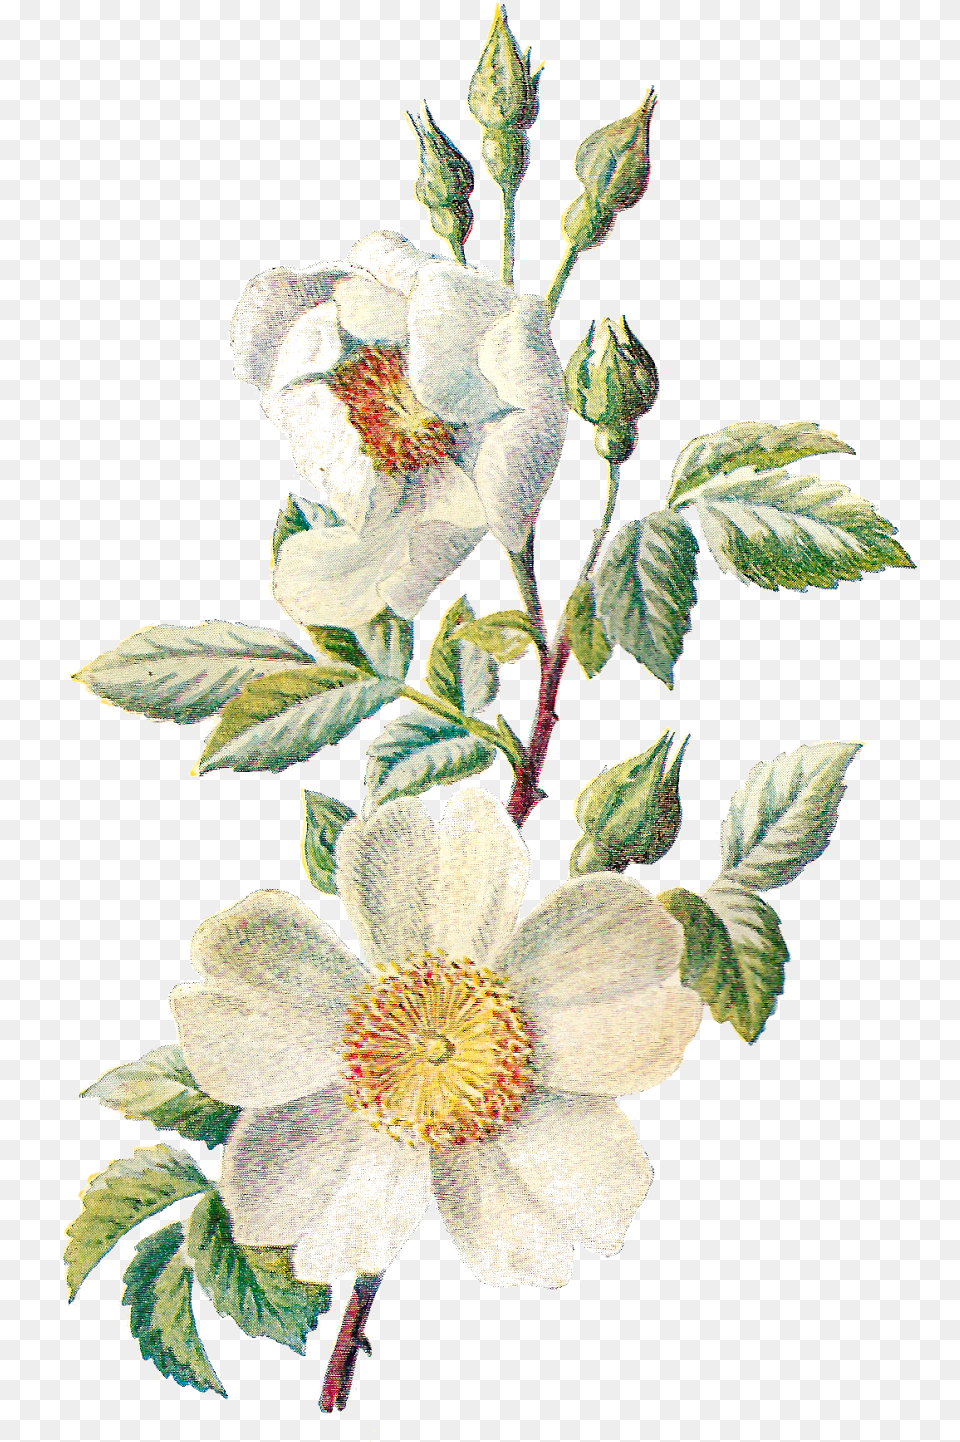 These Two Antique Flower Artwork Illustrations Can Wild Flower Botanical Art, Anemone, Petal, Plant, Anther Png